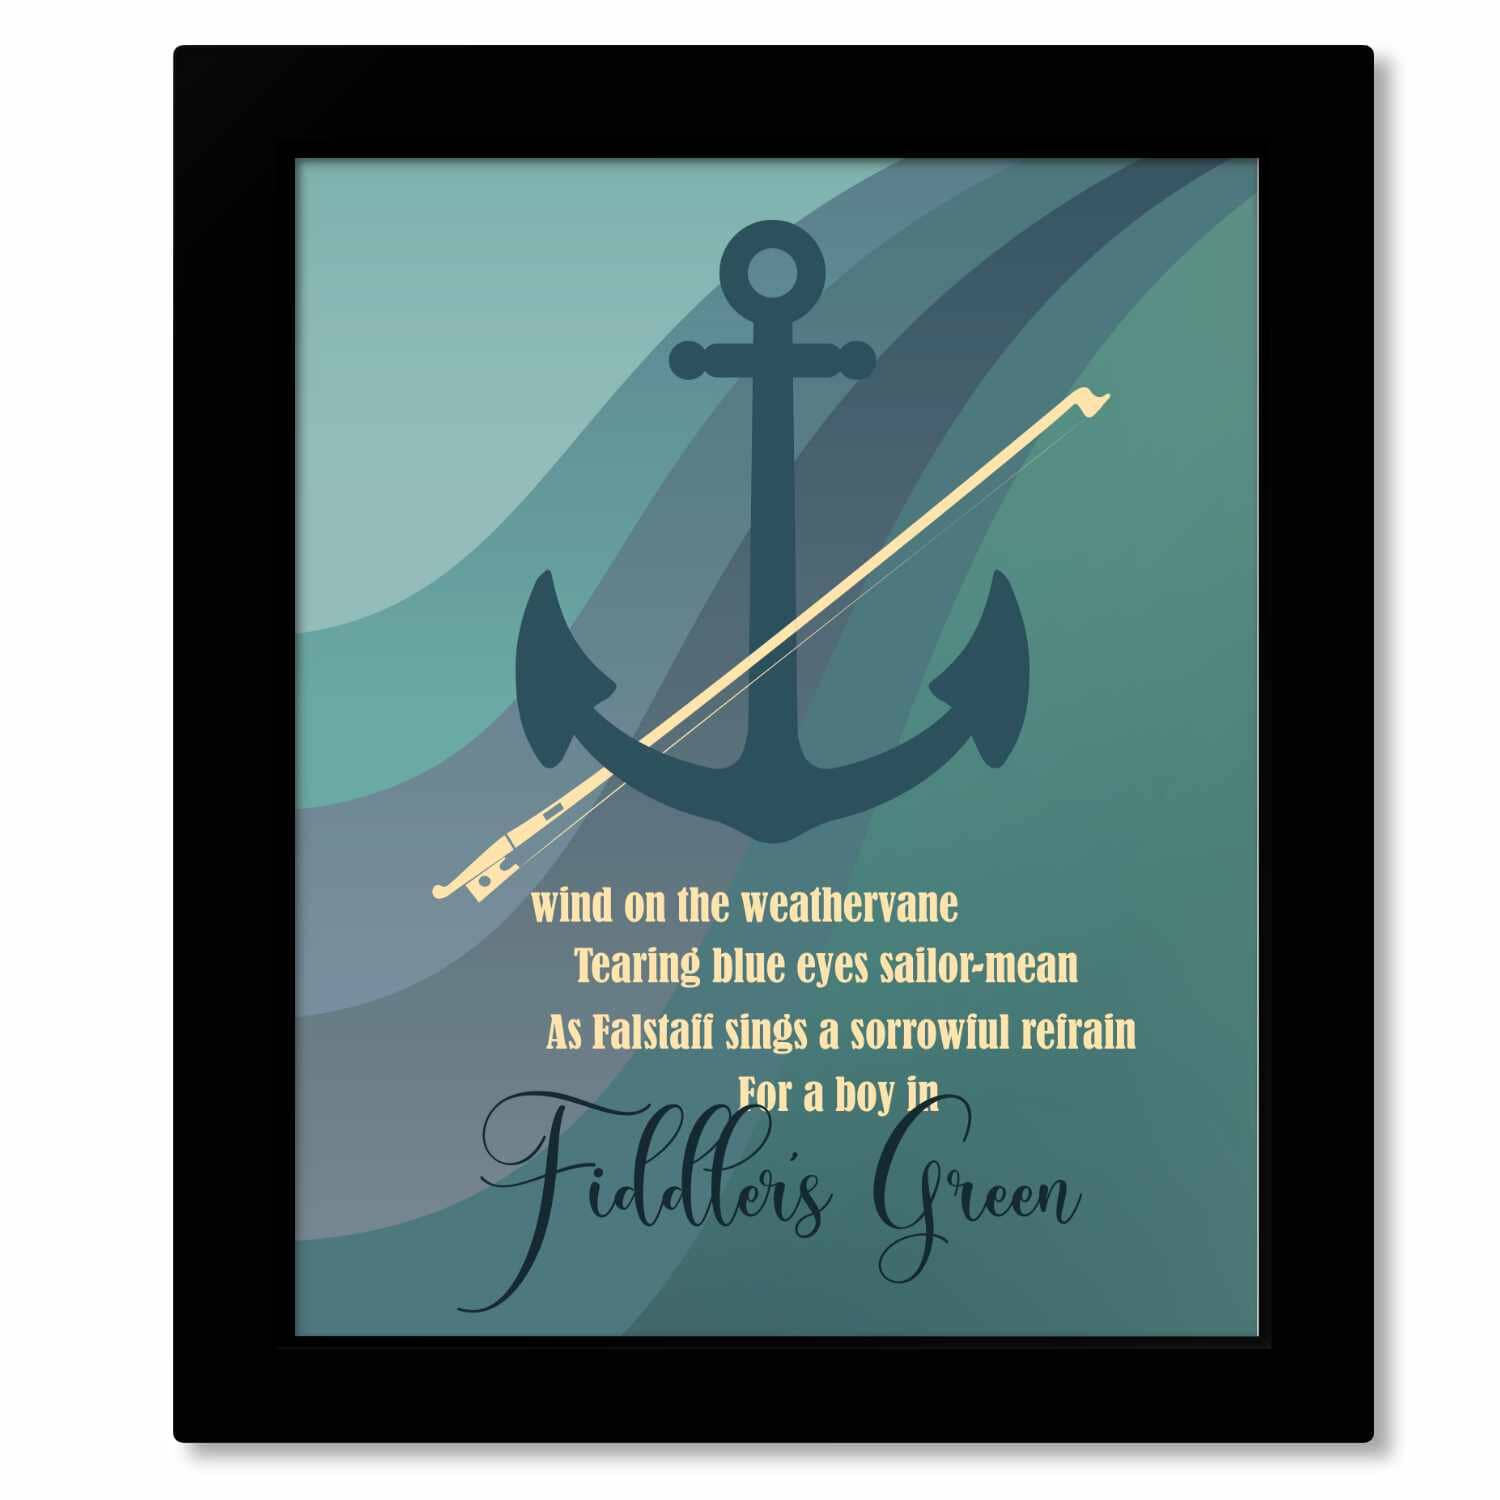 Fiddlers Green by Tragically Hip - Song Lyric Music Wall Art Song Lyrics Art Song Lyrics Art Framed 8x10 Print (without mat) 